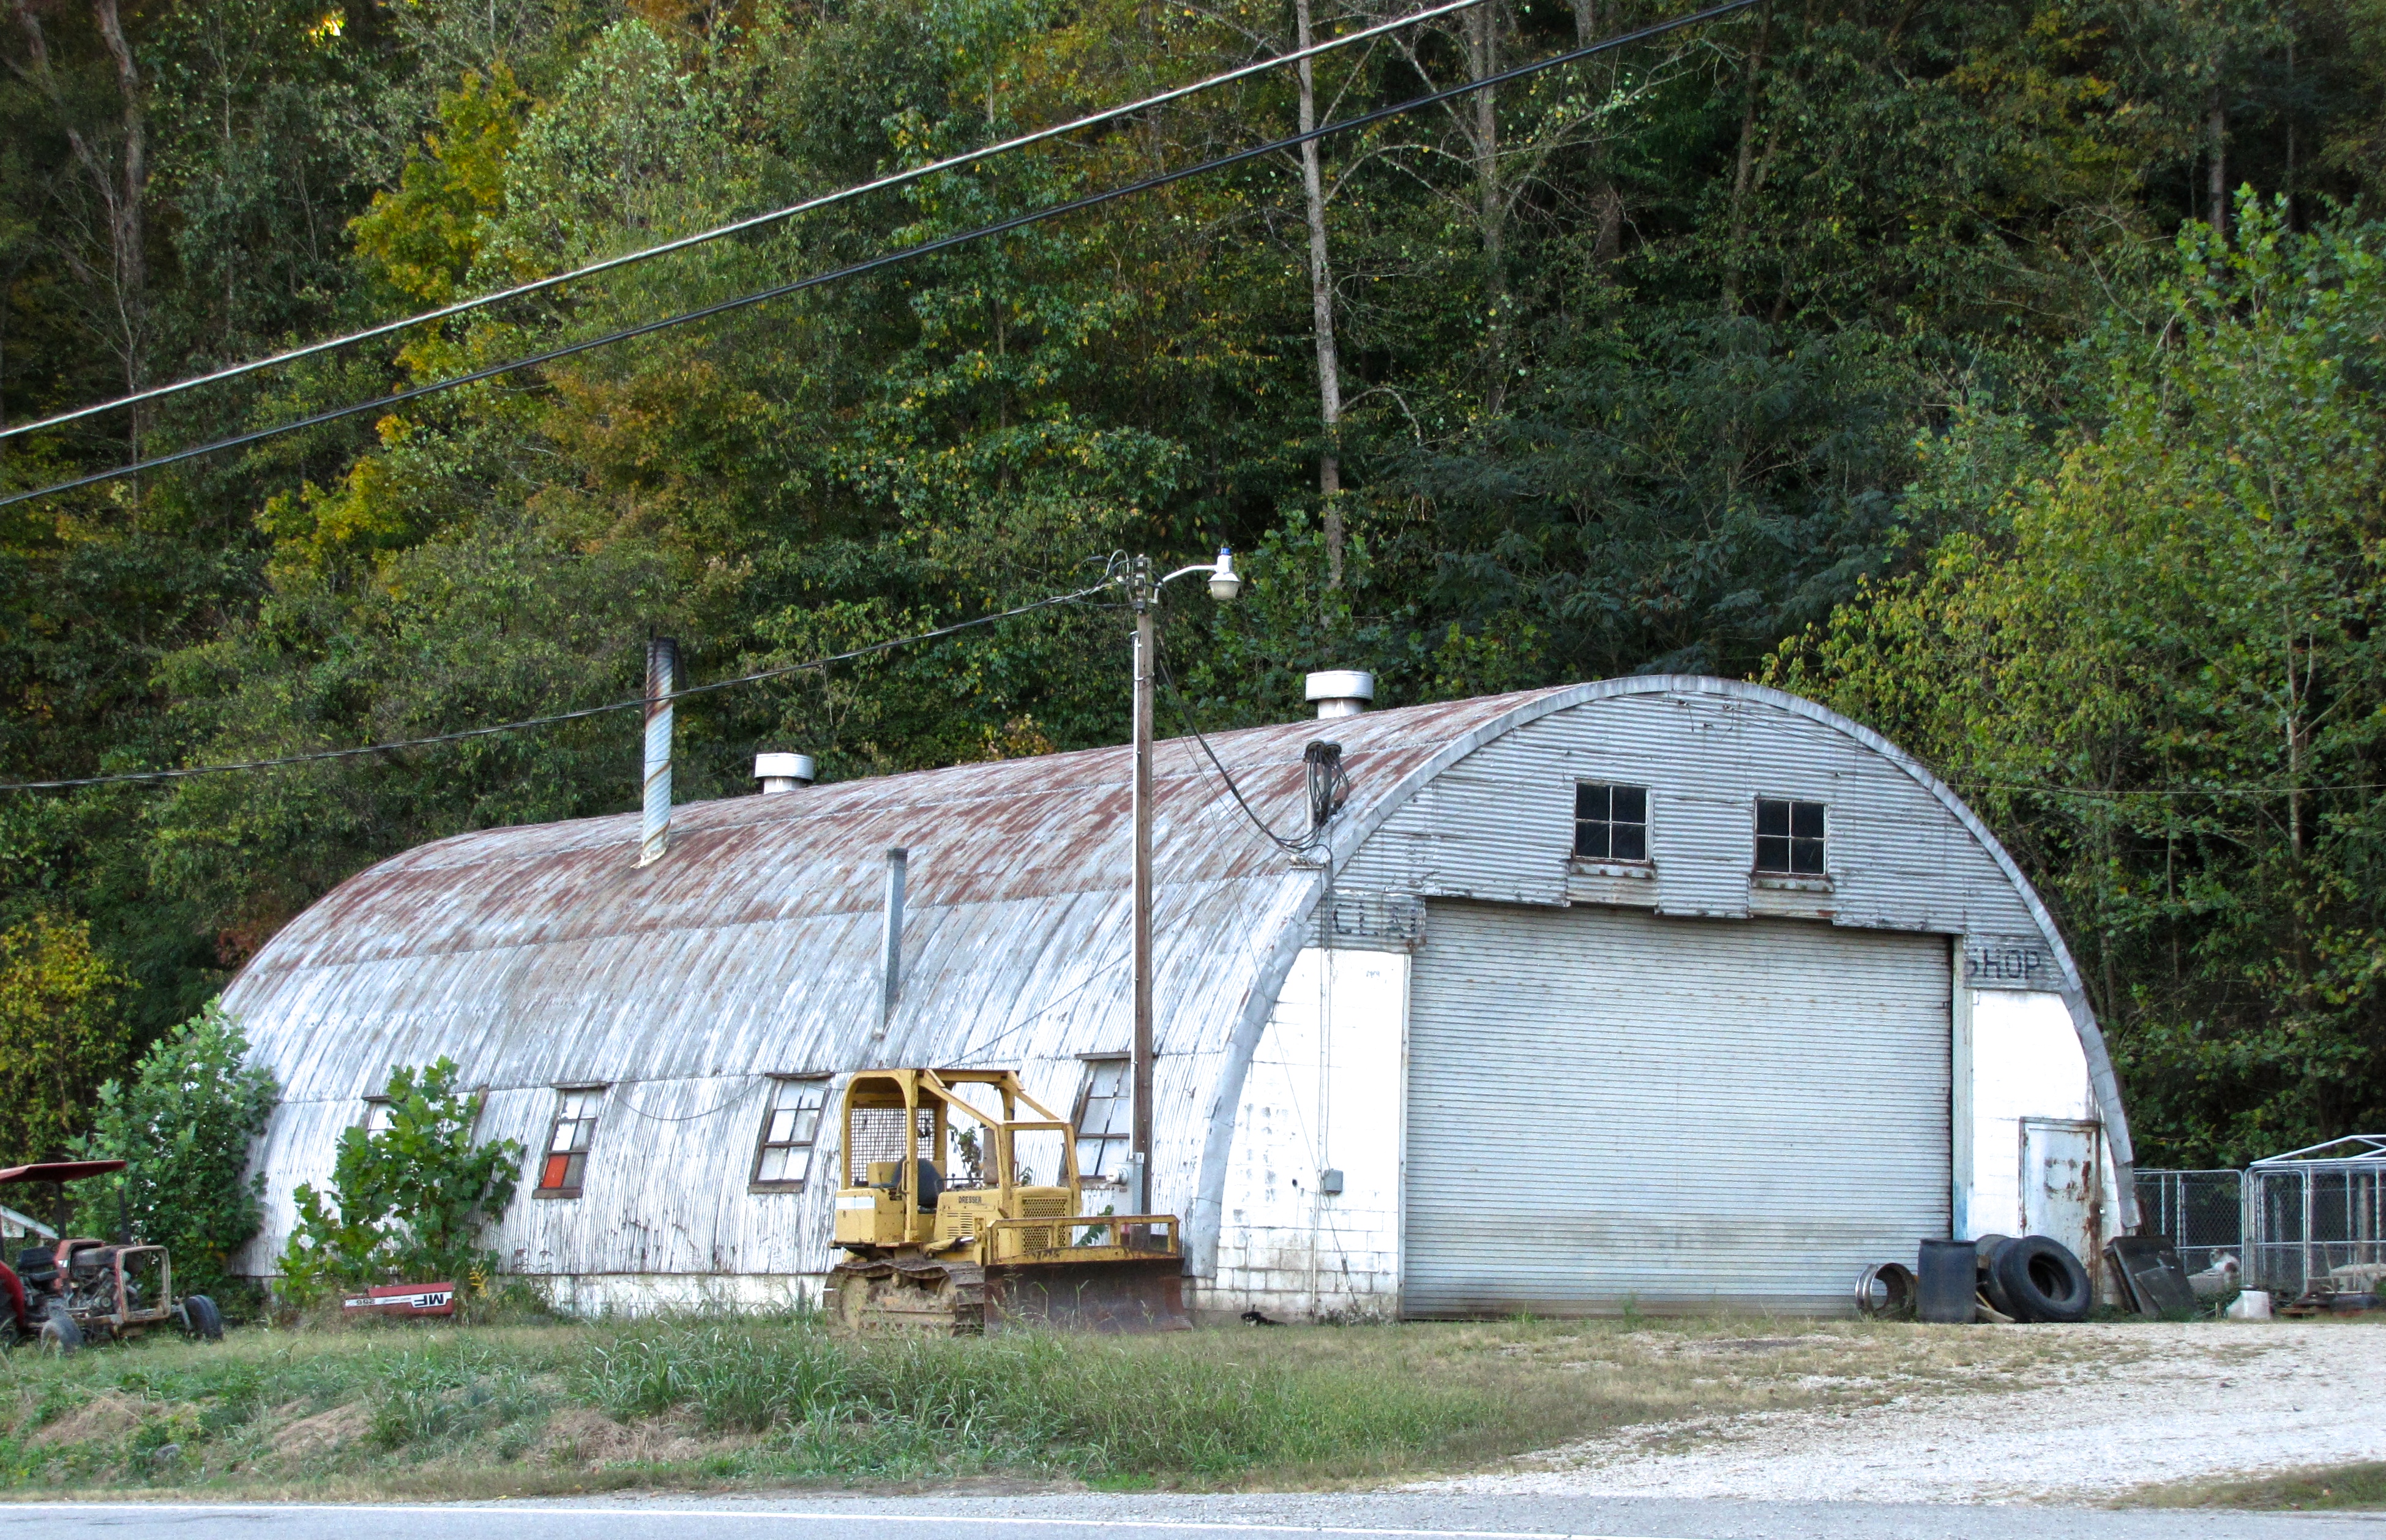 quonset hut in Rosedale, MD